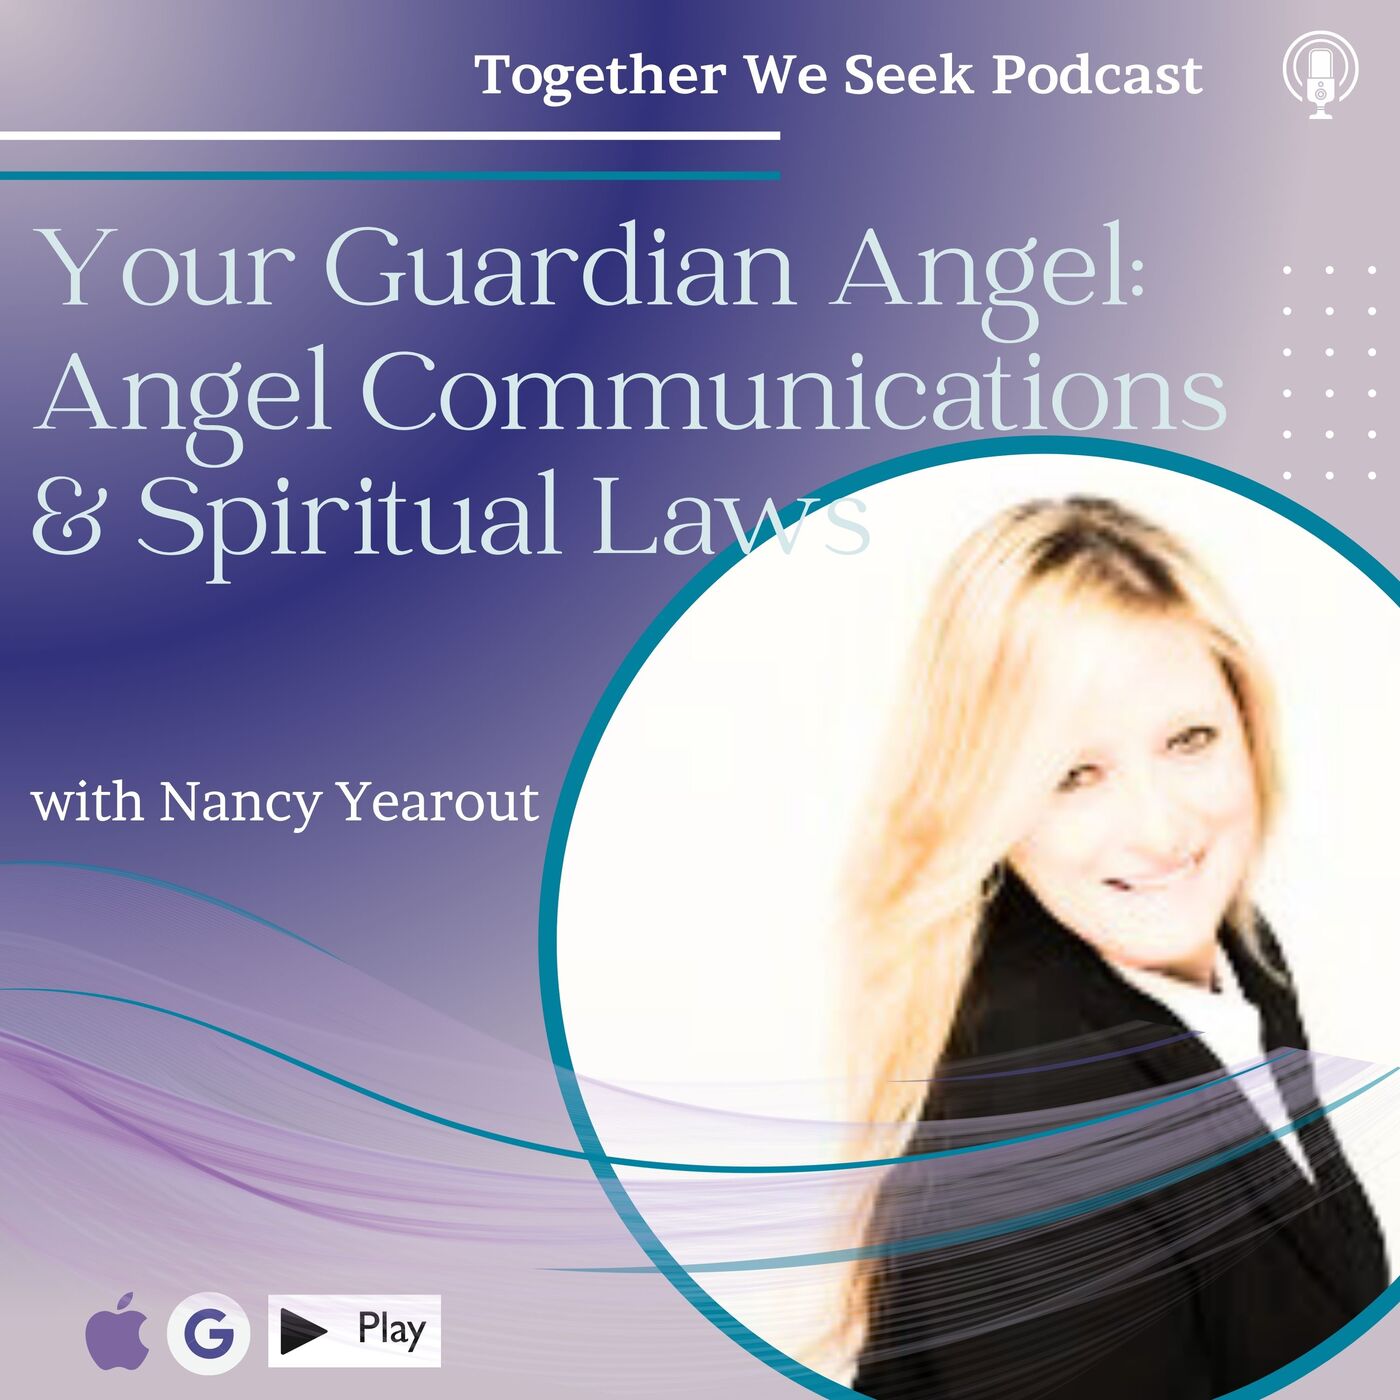 Your Guardian Angel: Angel Communications & Spiritual Laws with Nancy Yearout